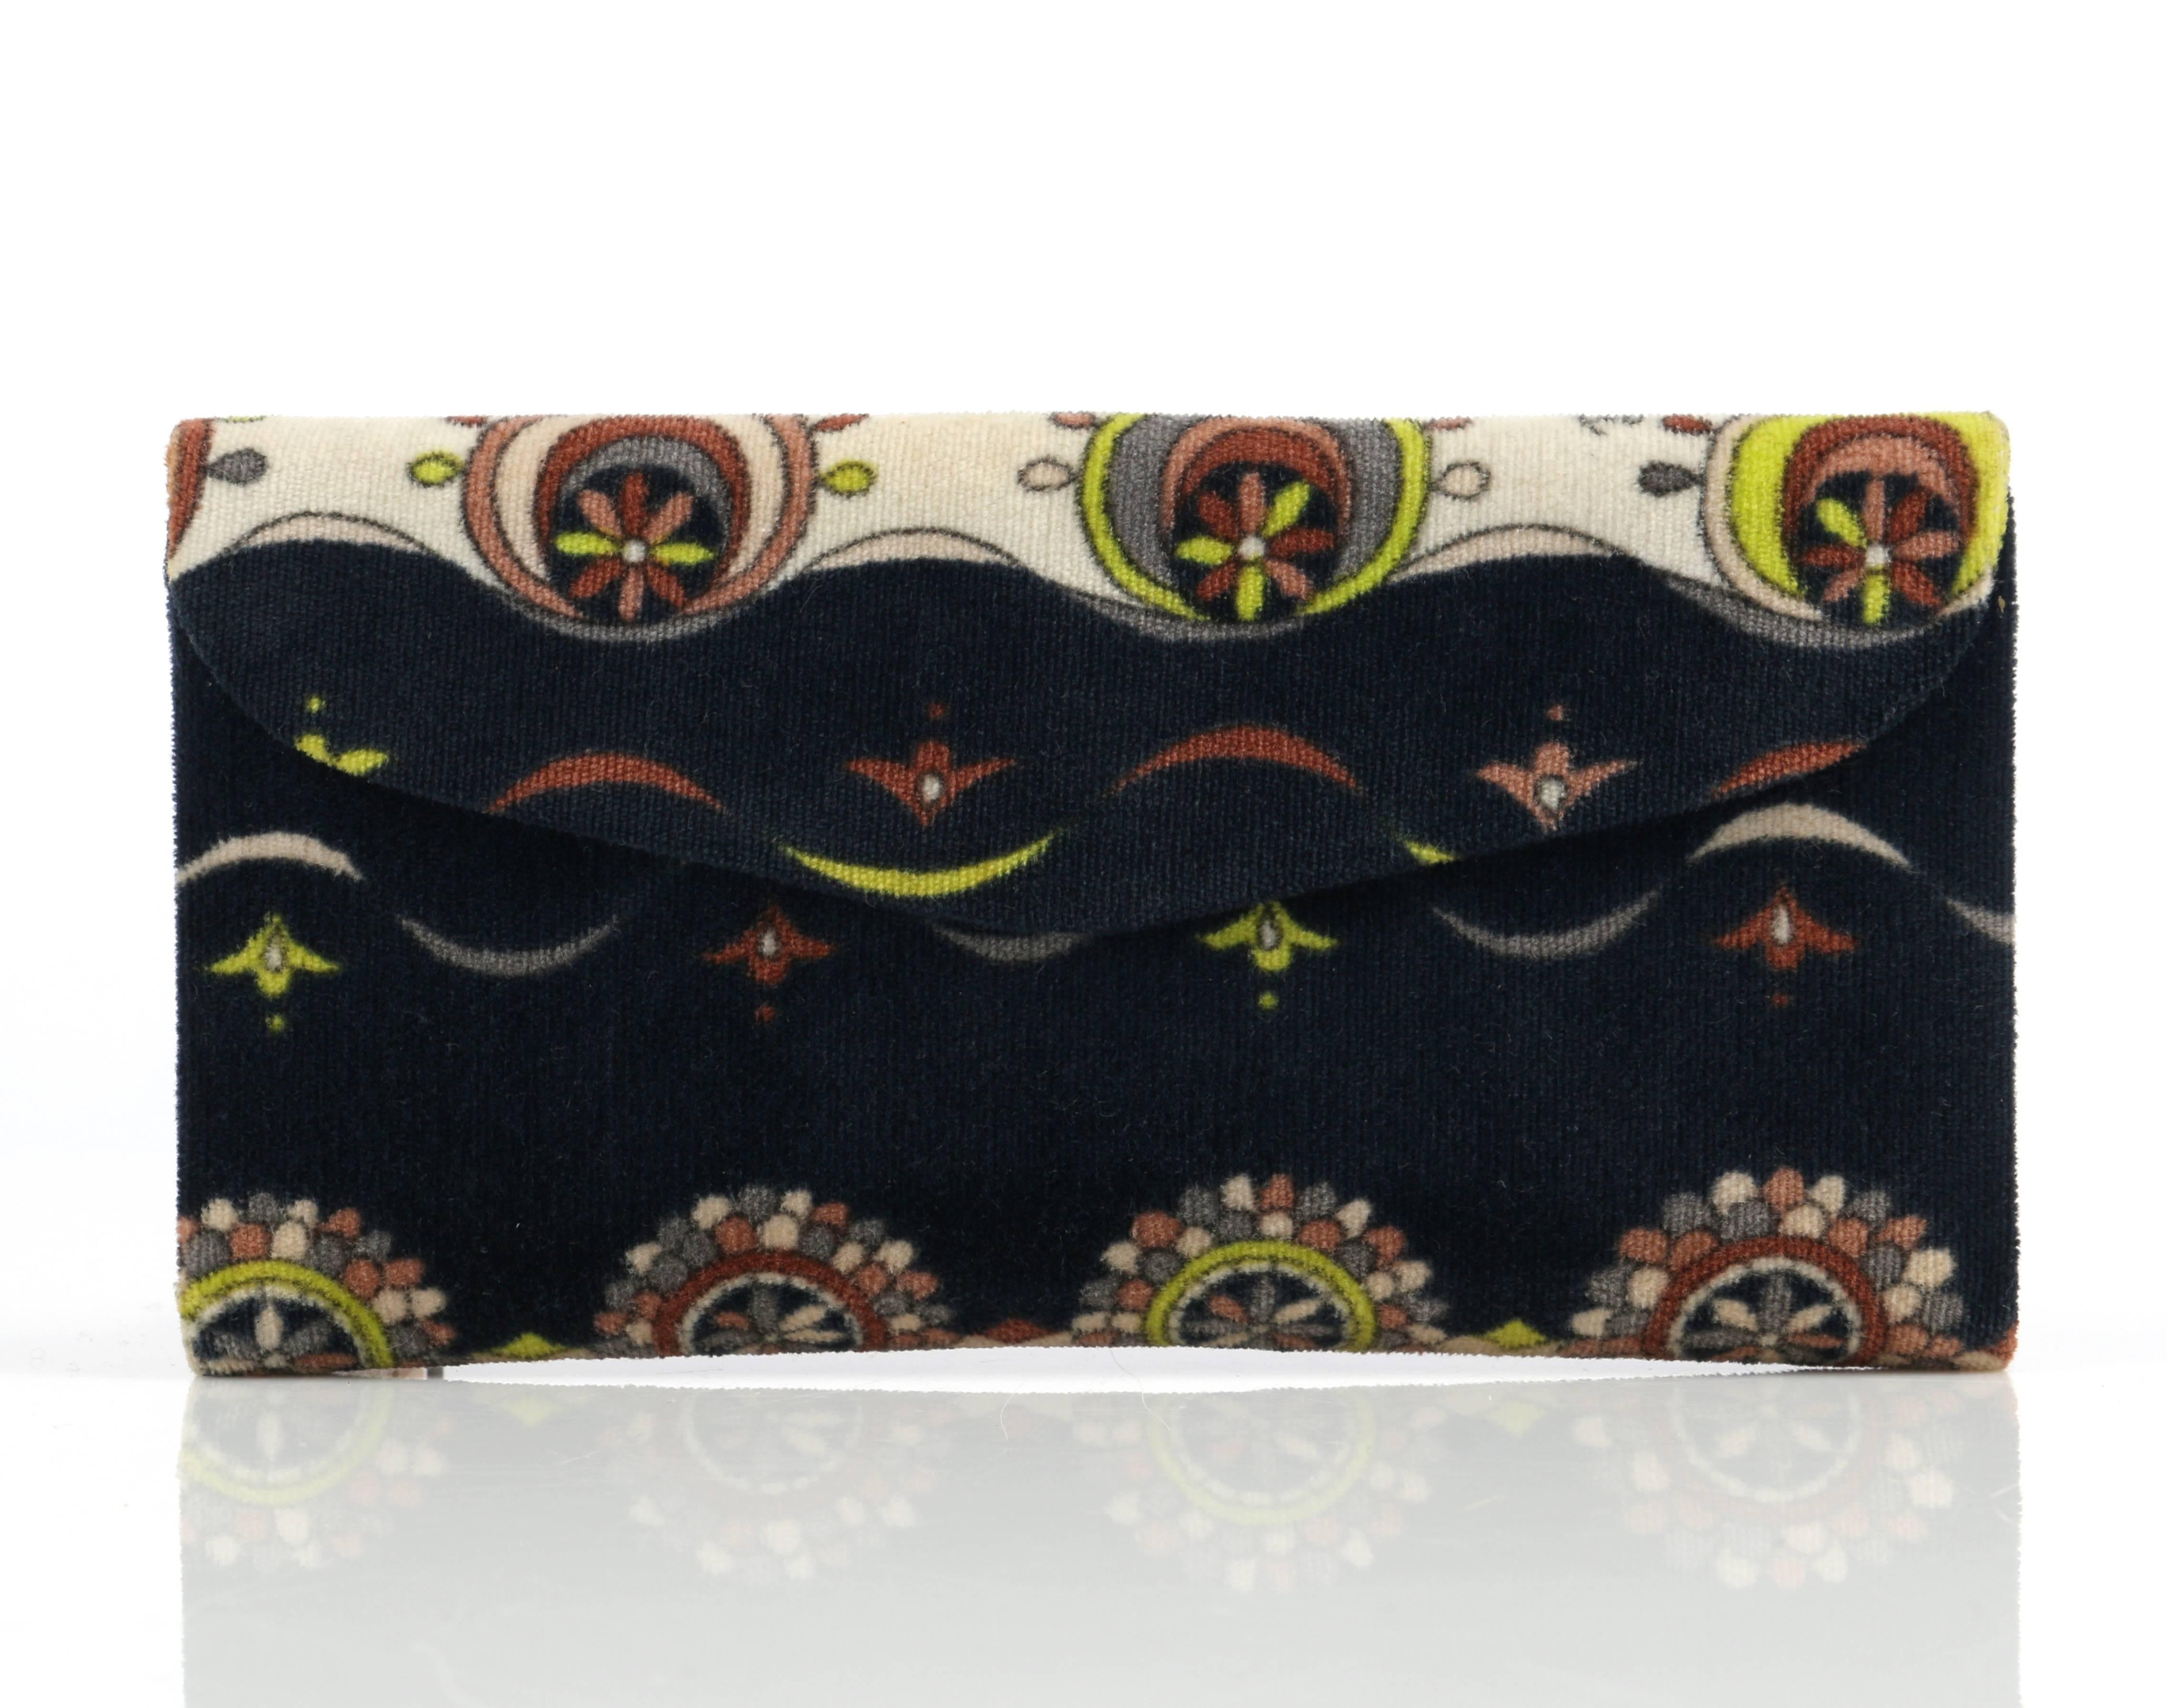 Vintage c.1960's (rare style) bi-fold velvet floral print in shades of black, cream, lime, brown, and gray wallet. Gold-tone metal hinge clasp with brown leather oval detail. Light brown leather lined with gold 